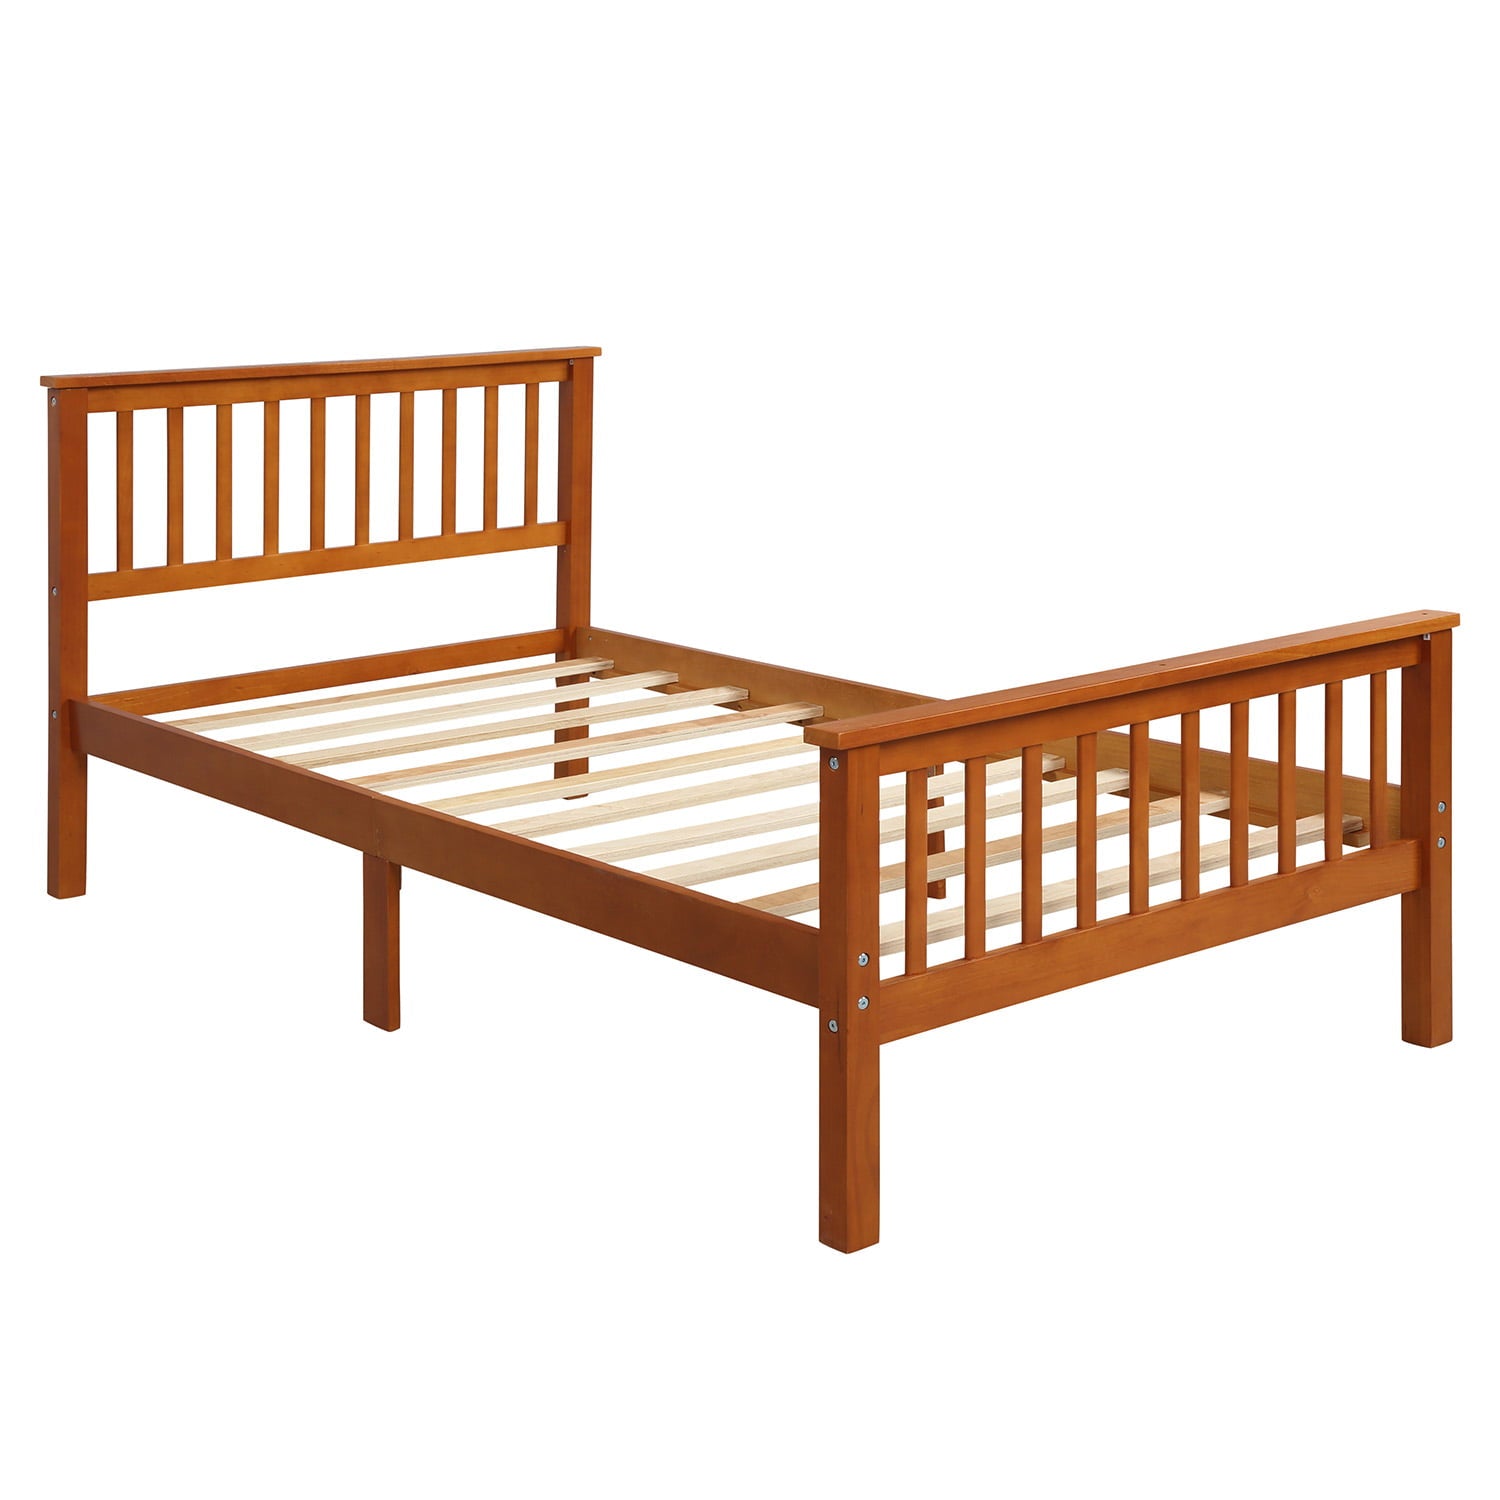 uhomepro Twin Bed Frame No Box Spring Needed, Wood Platform Bed Frame with Headboard and Footboard, Strong Wooden Slats, Twin Bed Frames for Kids, Adults, Modern Bedroom Furniture, Oak Color